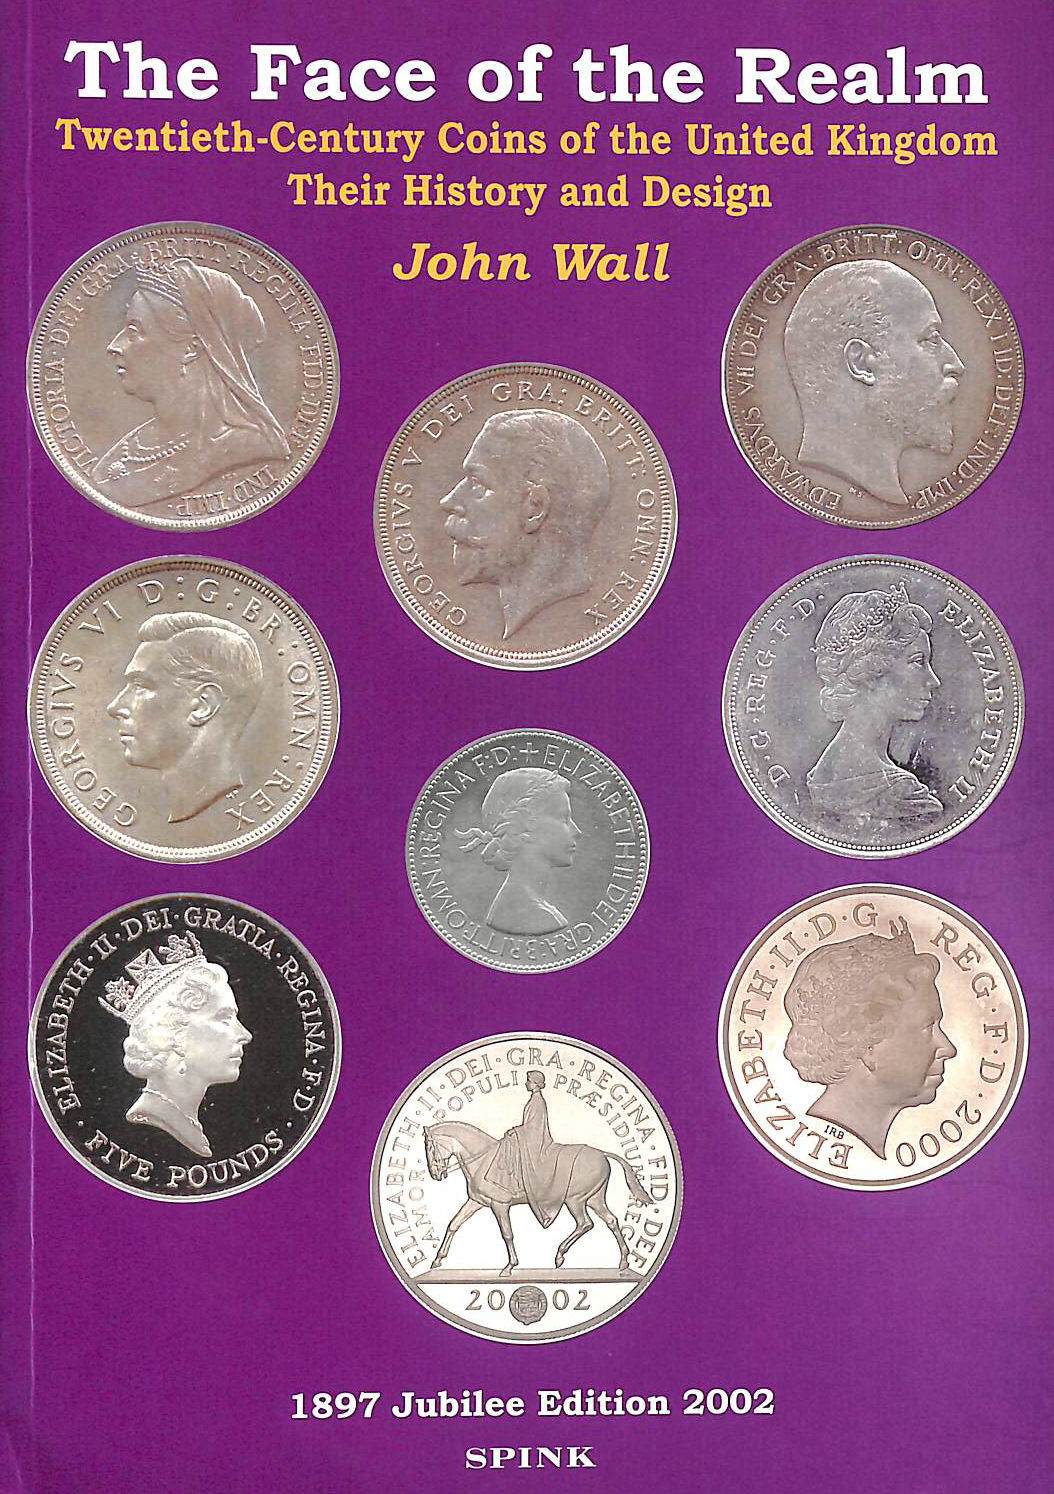  - Face of the Realm: Twentieth Century Coins of the United Kingdom - Their History and Design